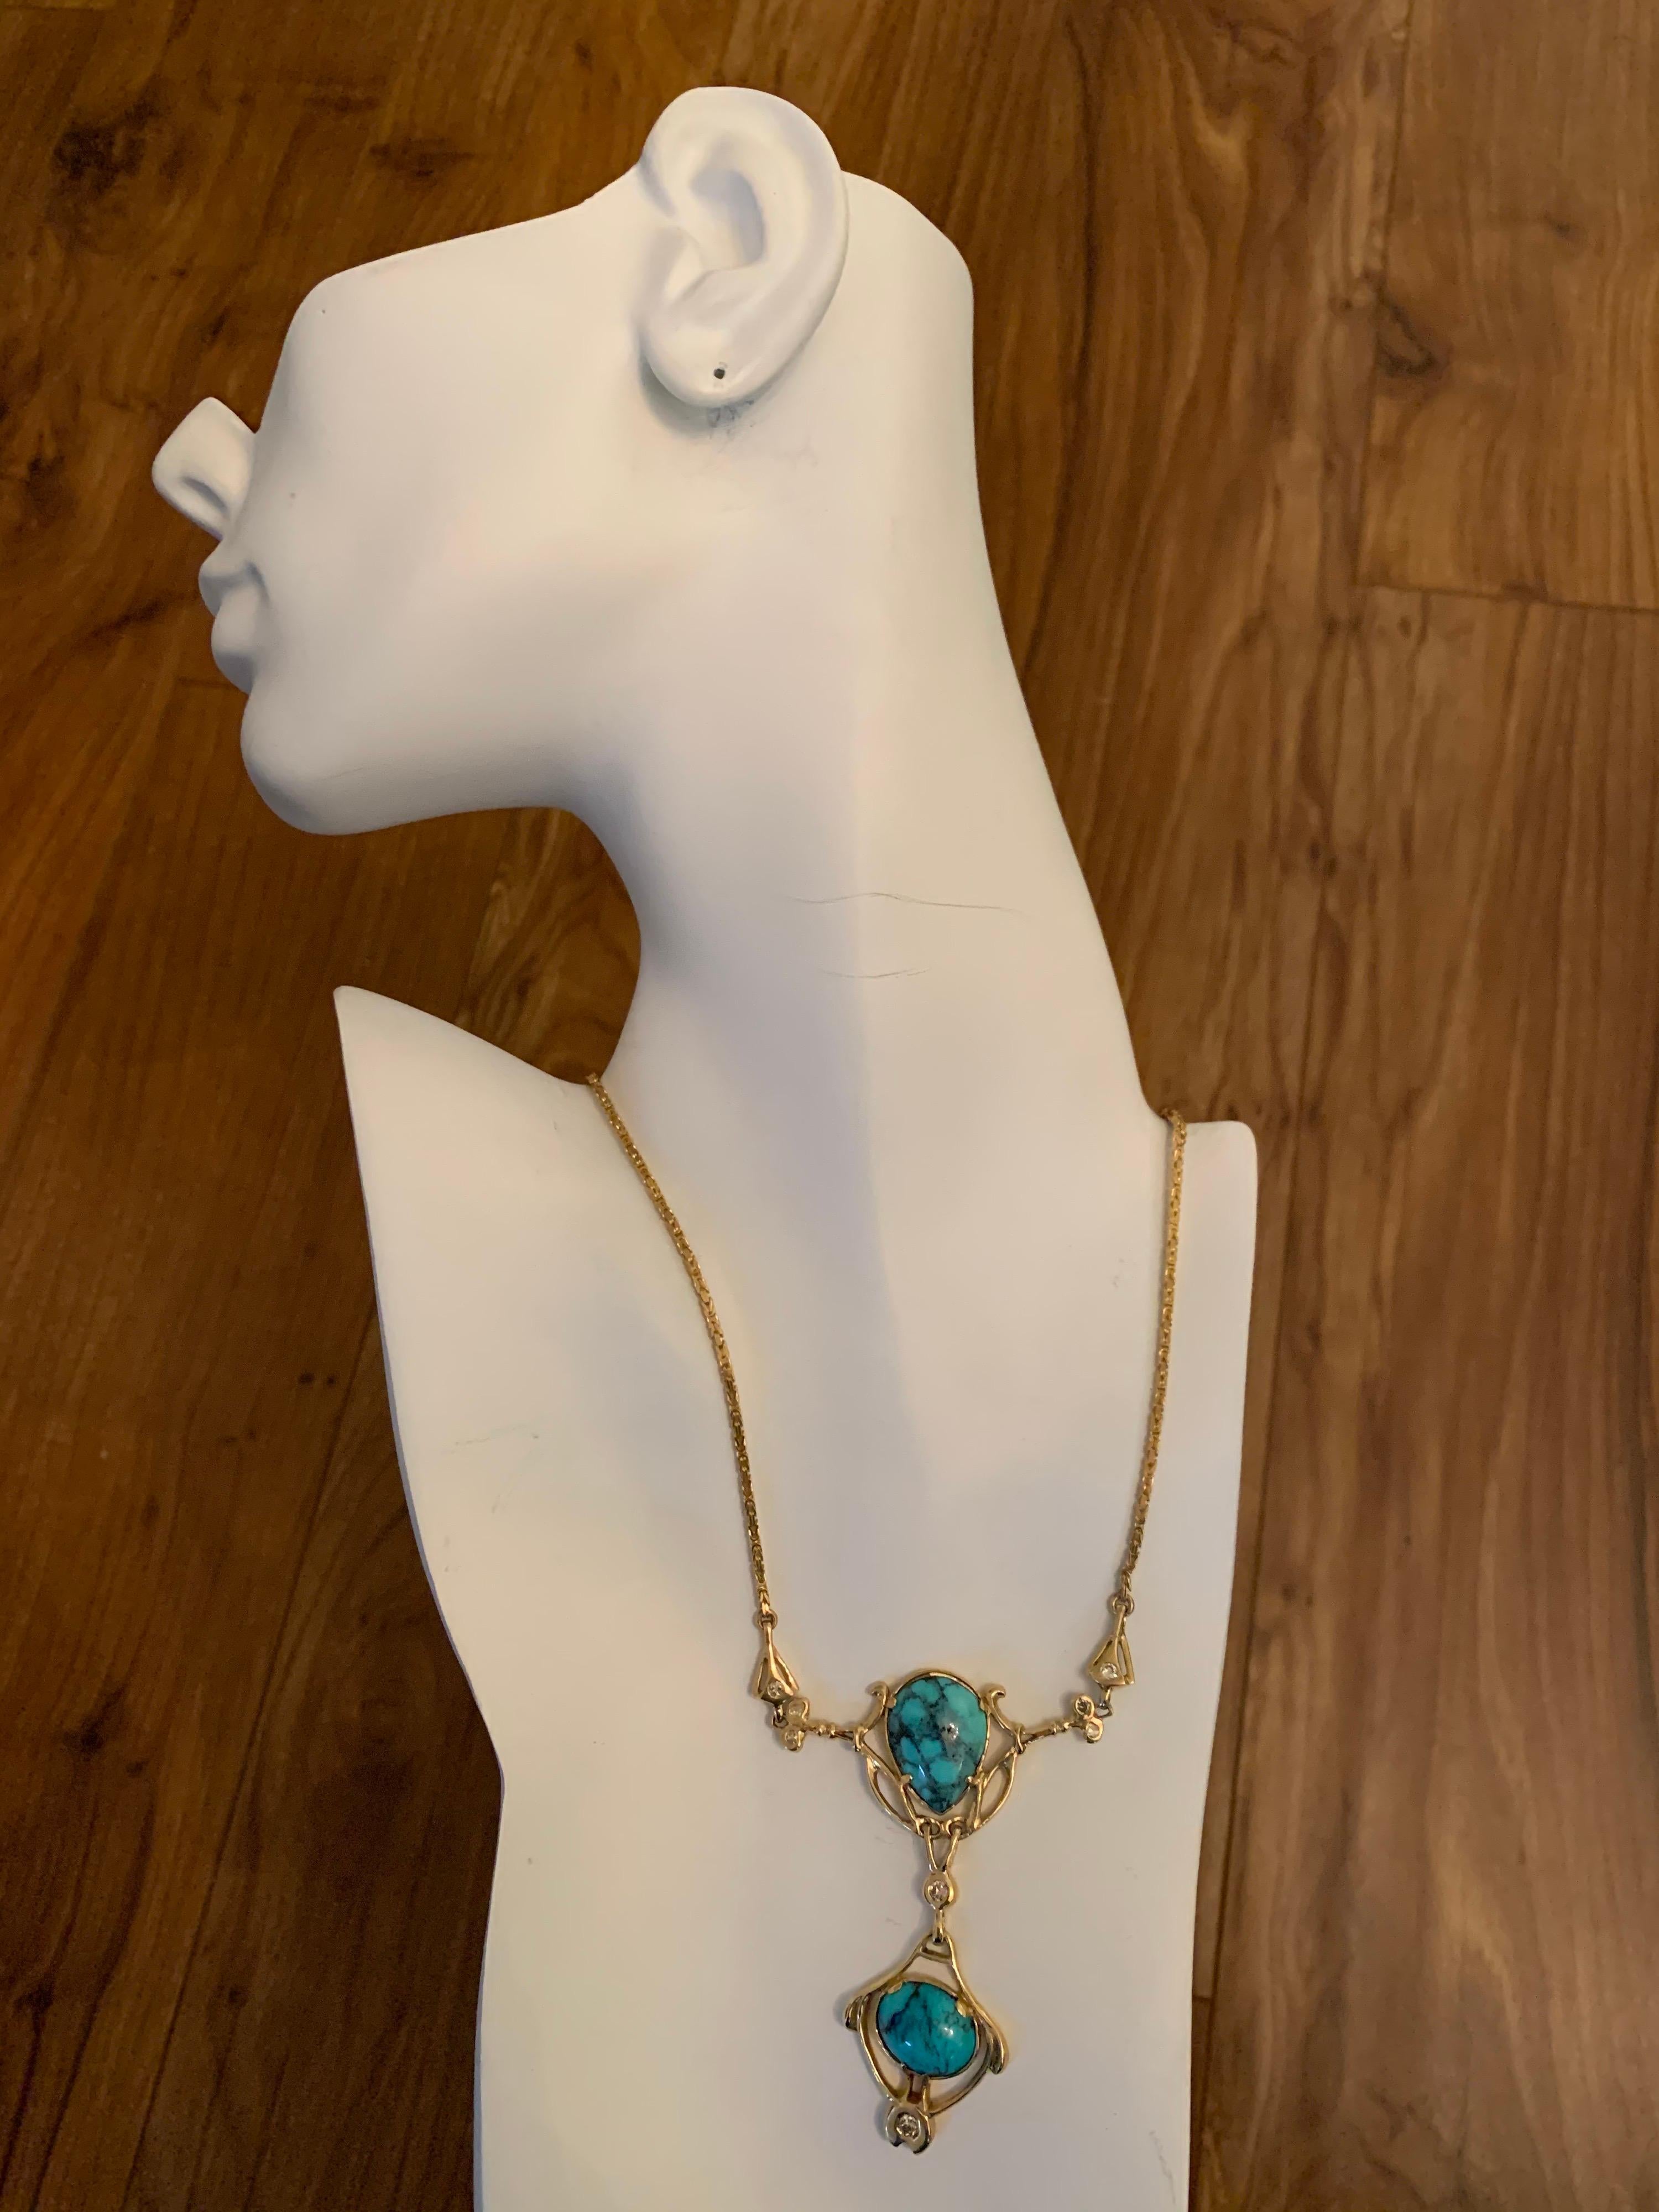 Stunning 14k Yellow Gold Necklace 19 inches in length.

The stone is set with Turquoise and 8 Natural Round Brilliant diamonds weighing approximately 0.65 carats.

The piece weighs 29.3 grams. 

Circa 1950.